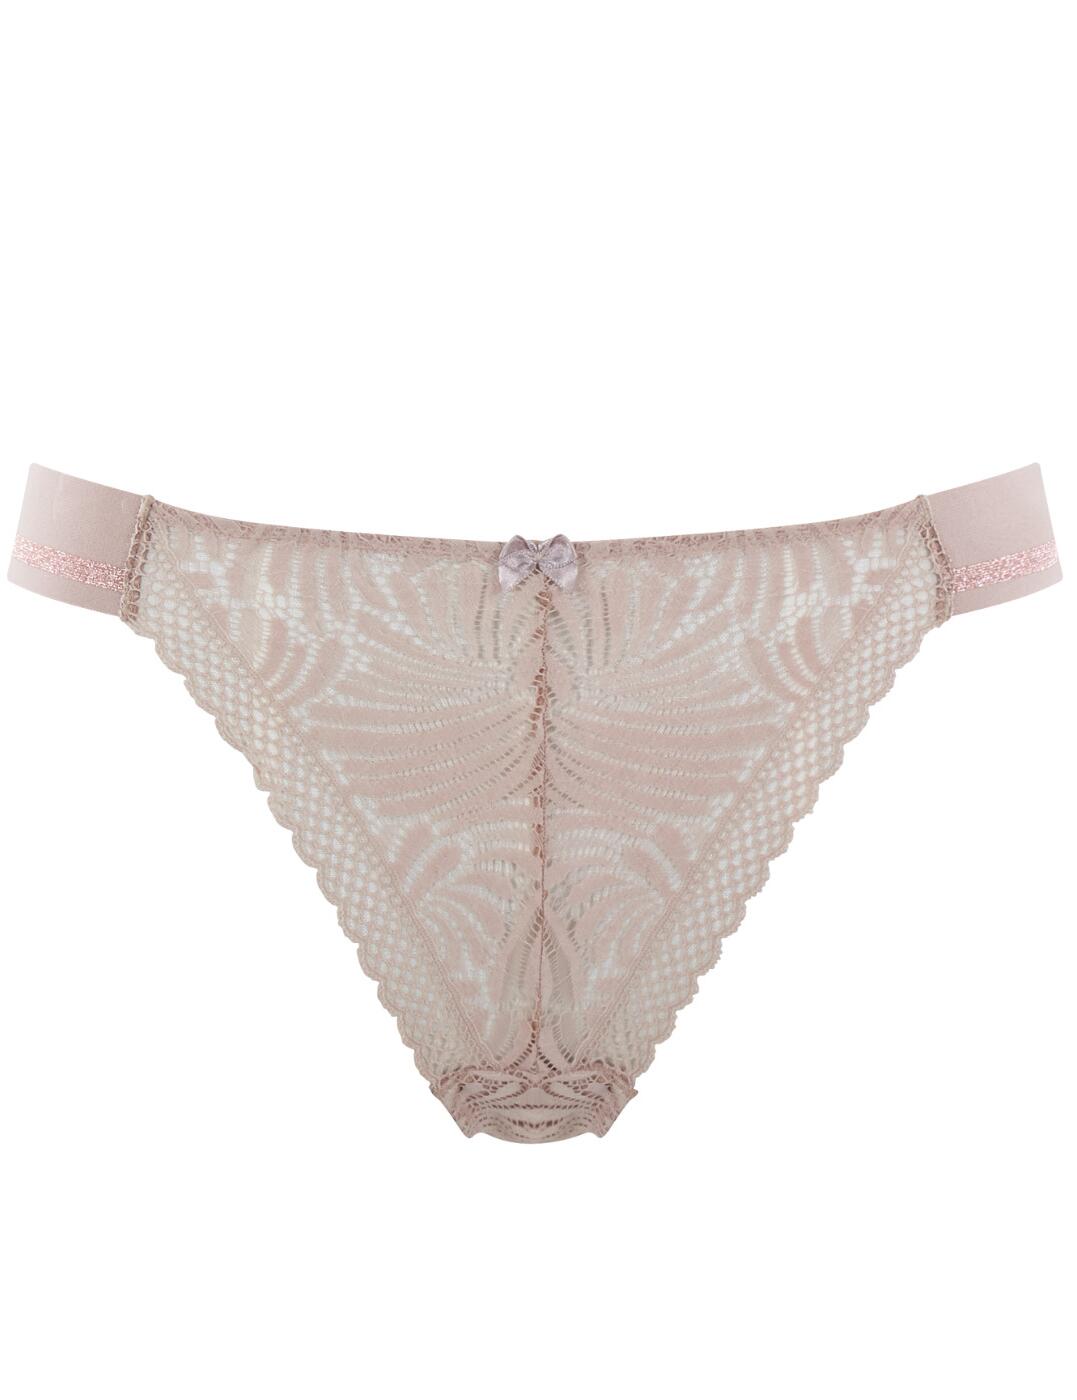 Cleo by Panache Lyzy Vibe Tanga Brief - Belle Lingerie | Cleo by ...